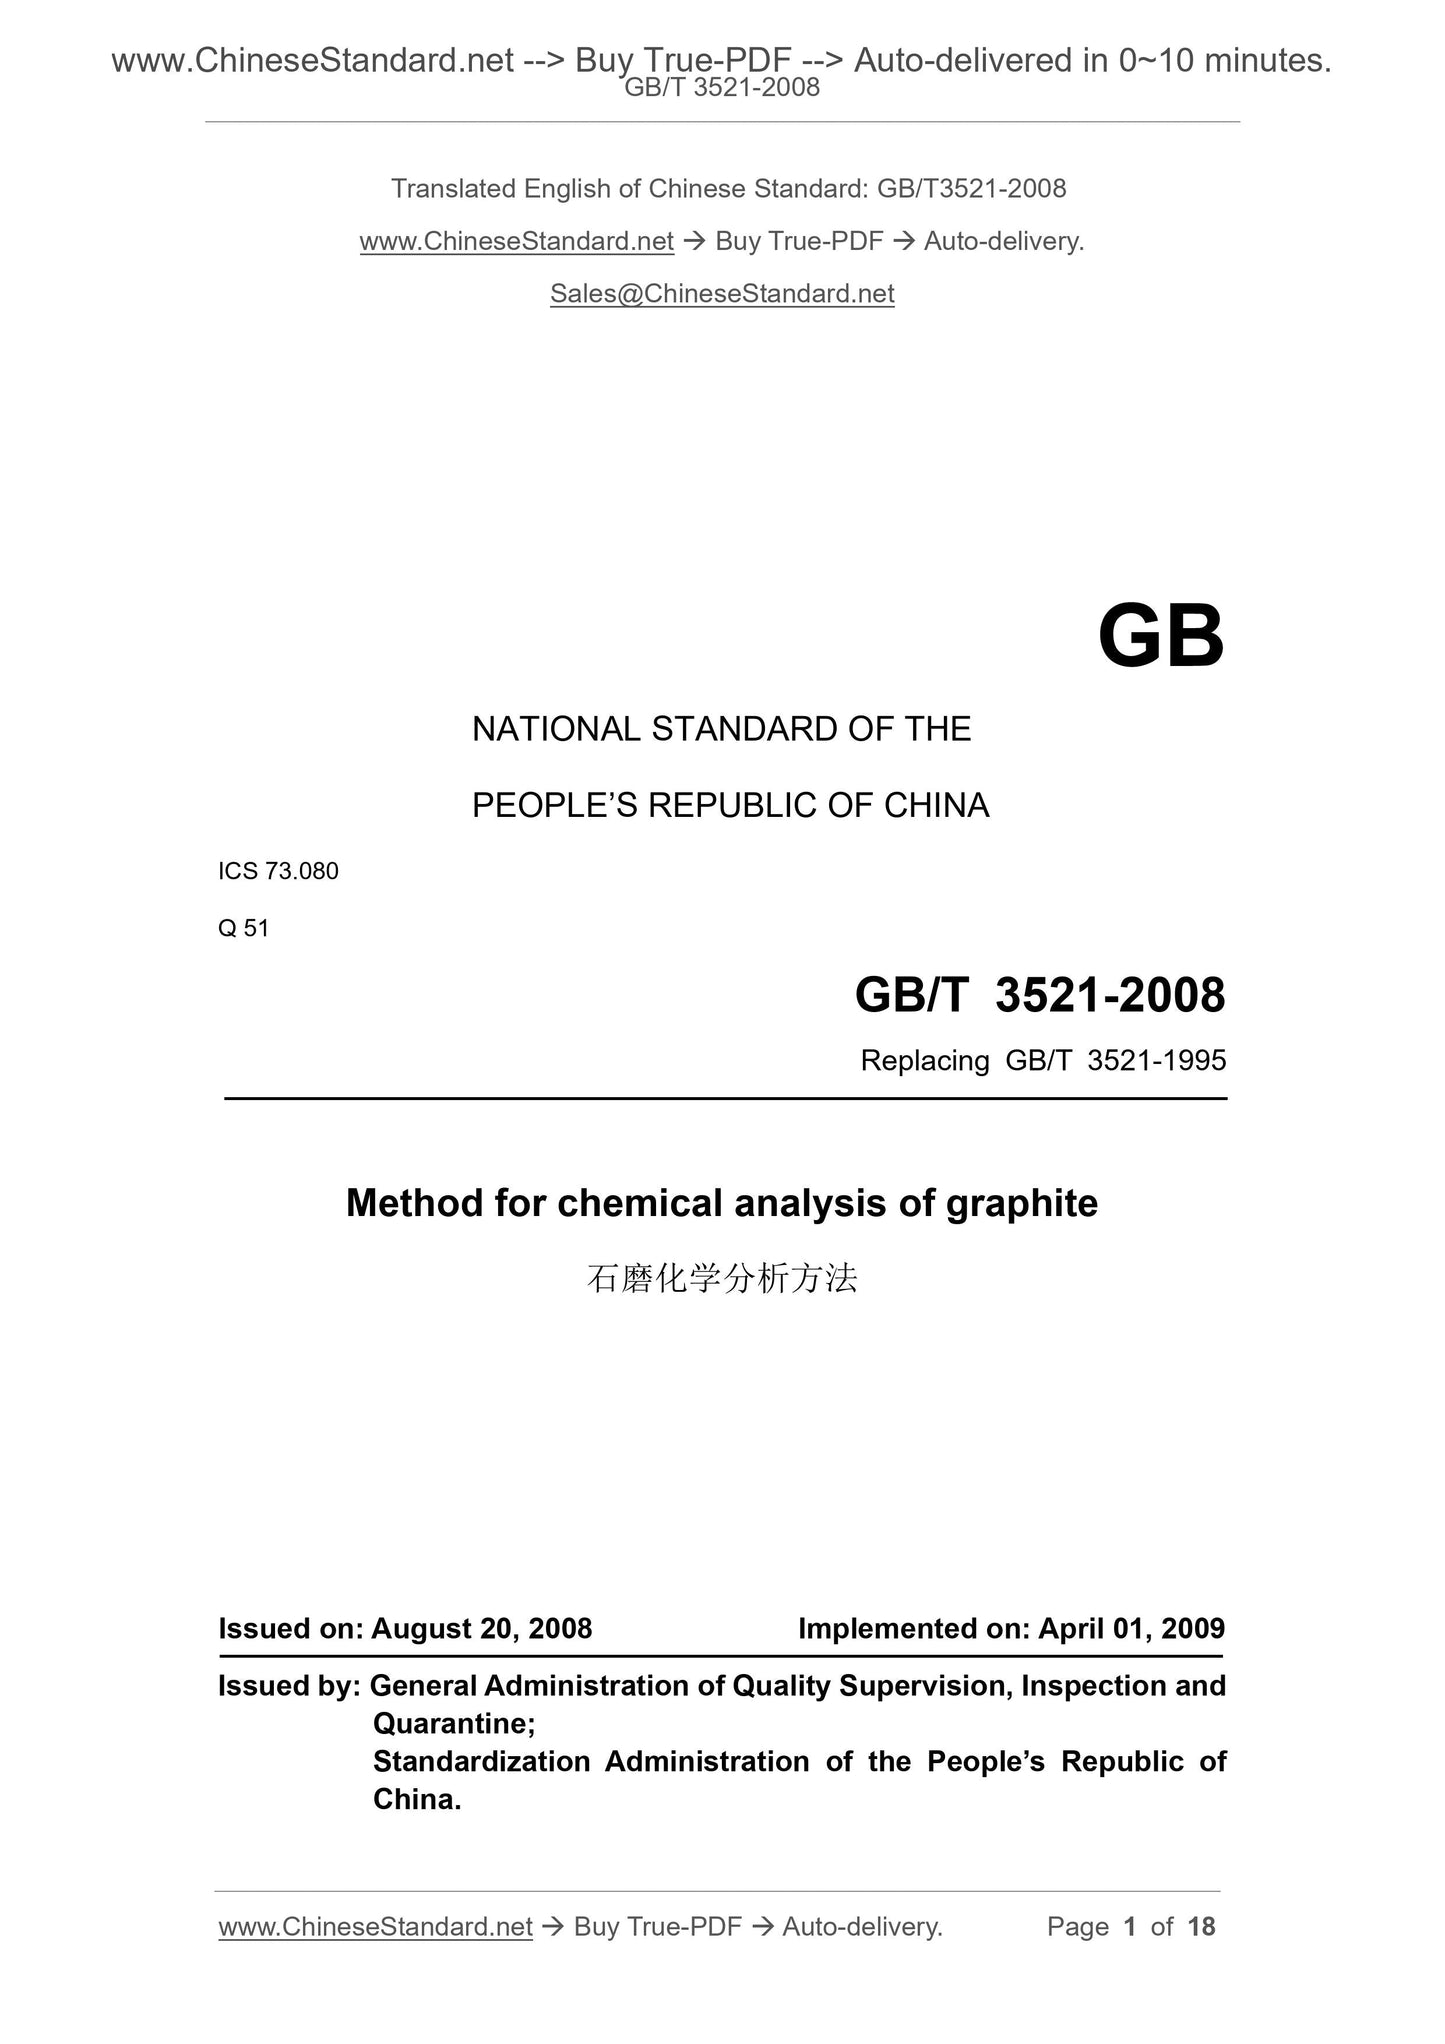 GB/T 3521-2008 Page 1